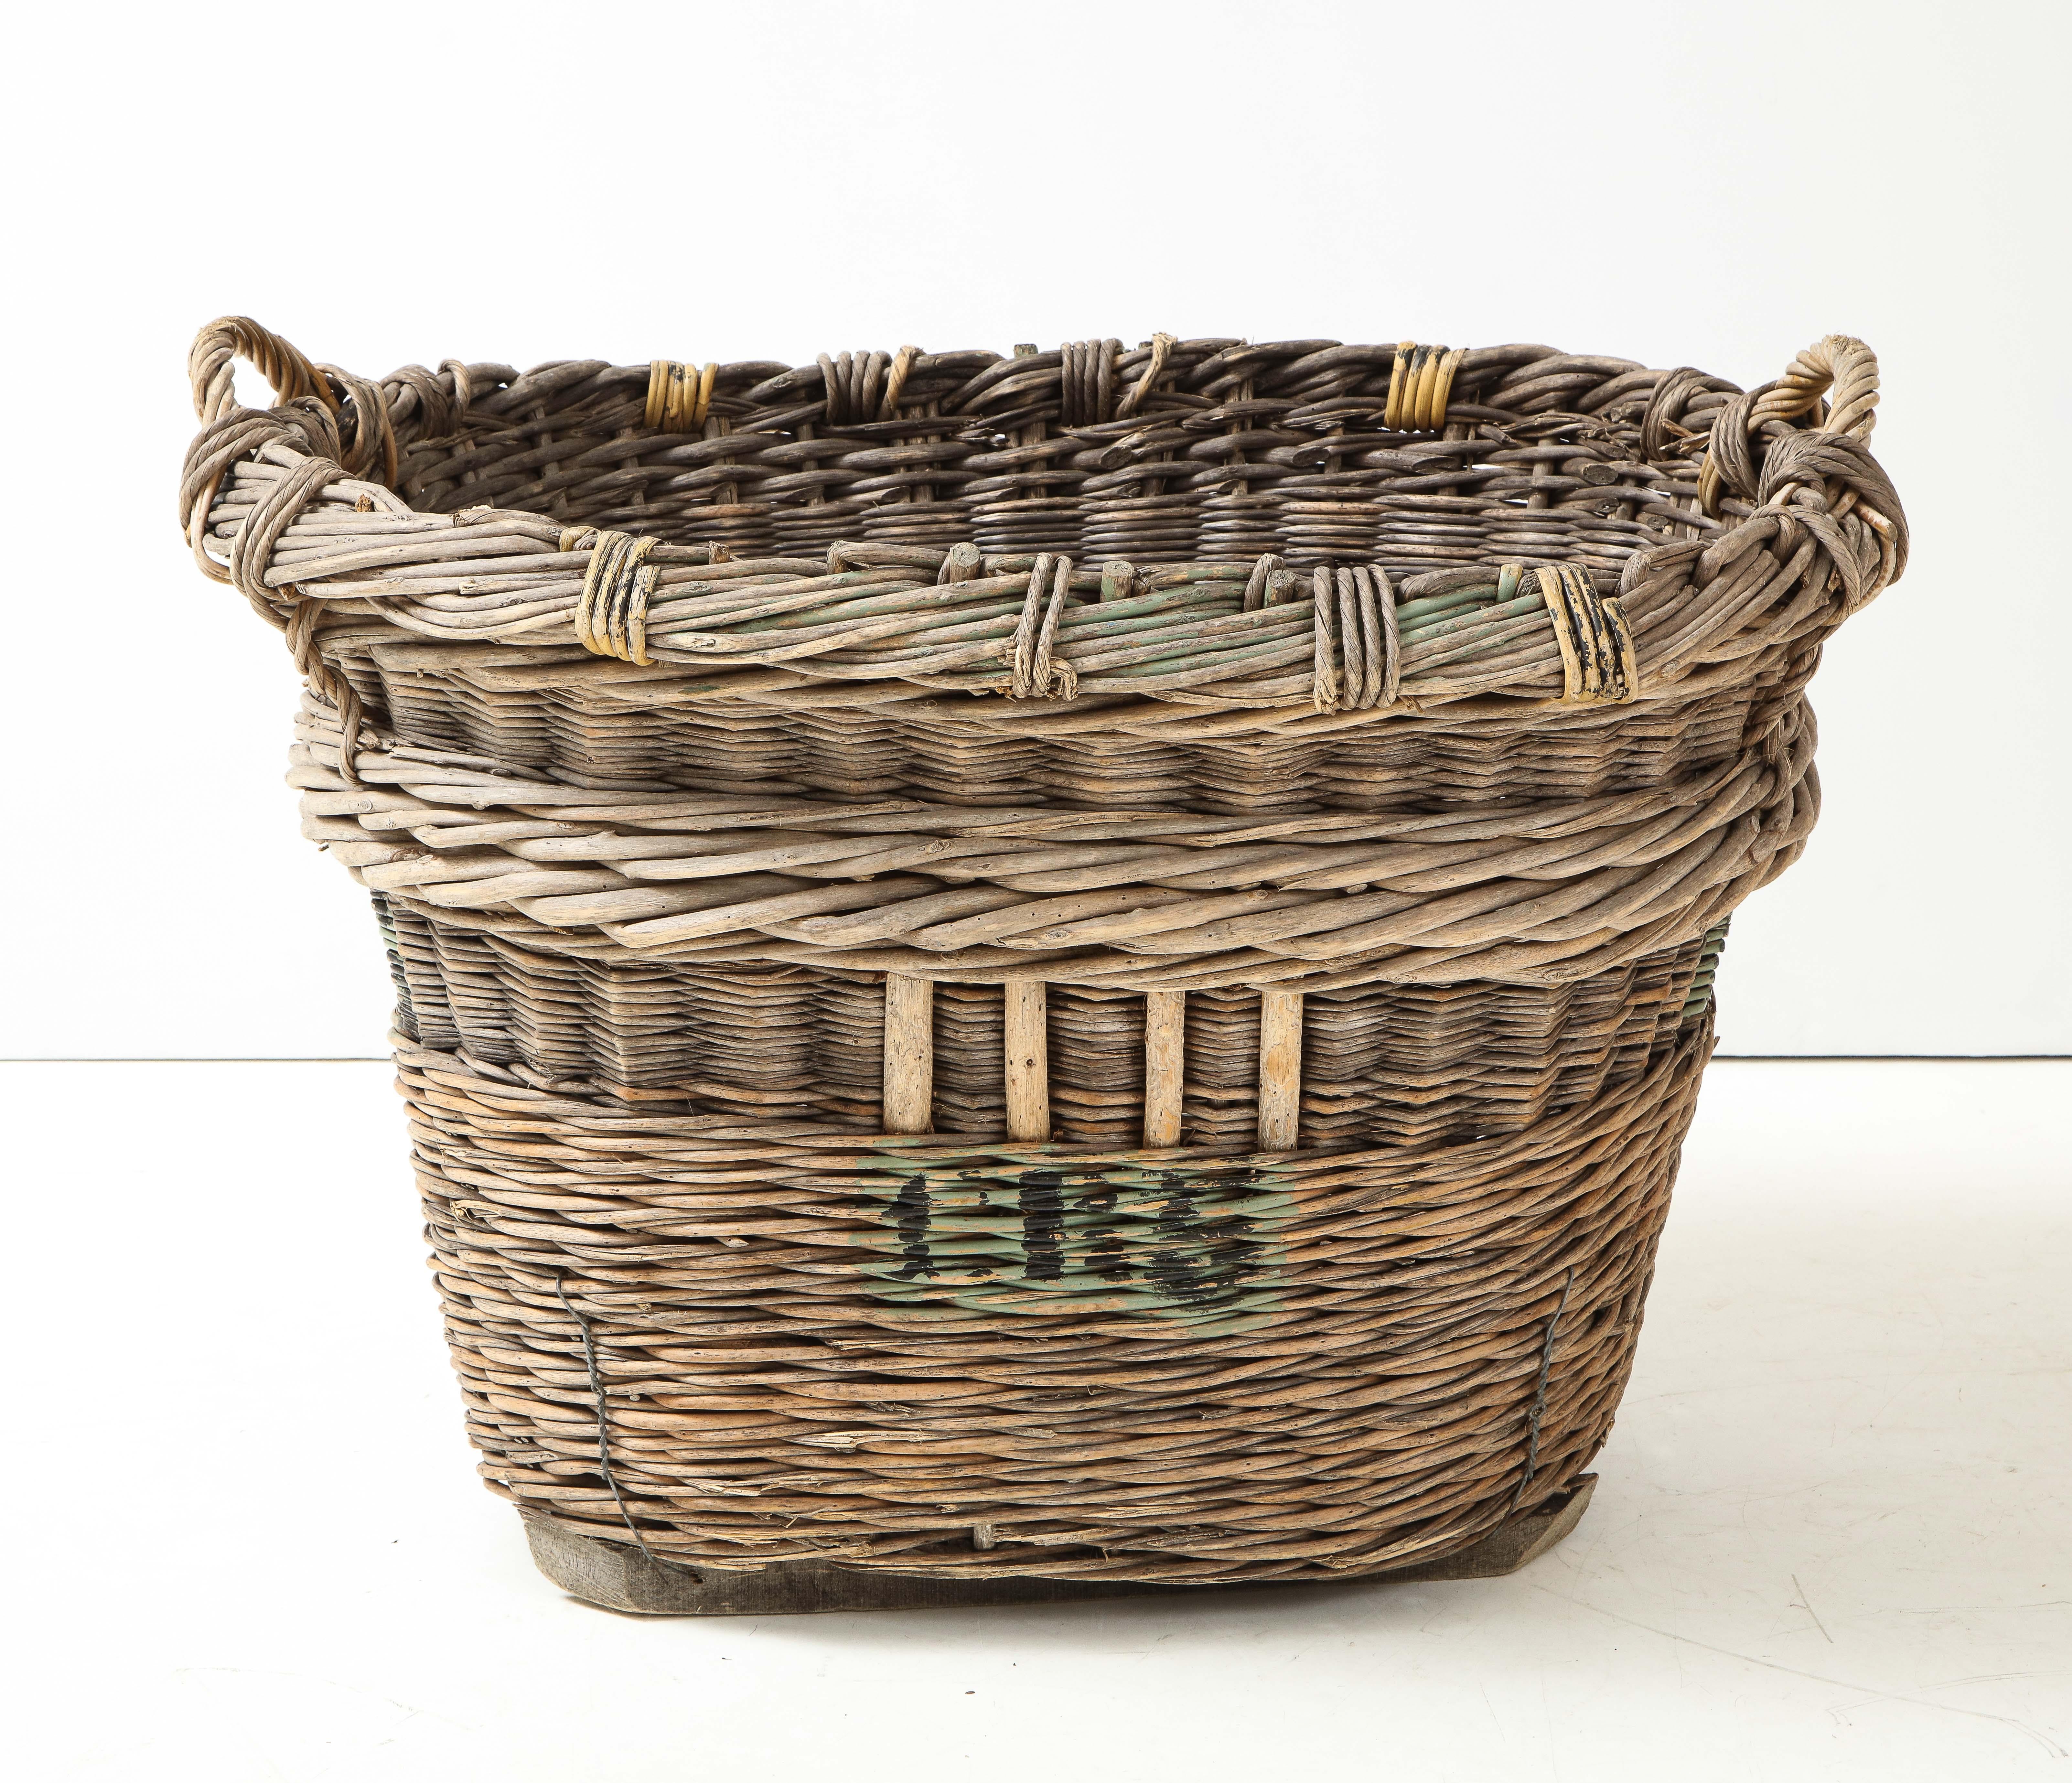 Early 20th Century Large Champagne Grape Harvest Baskets, Reims, France, c. 1920-30